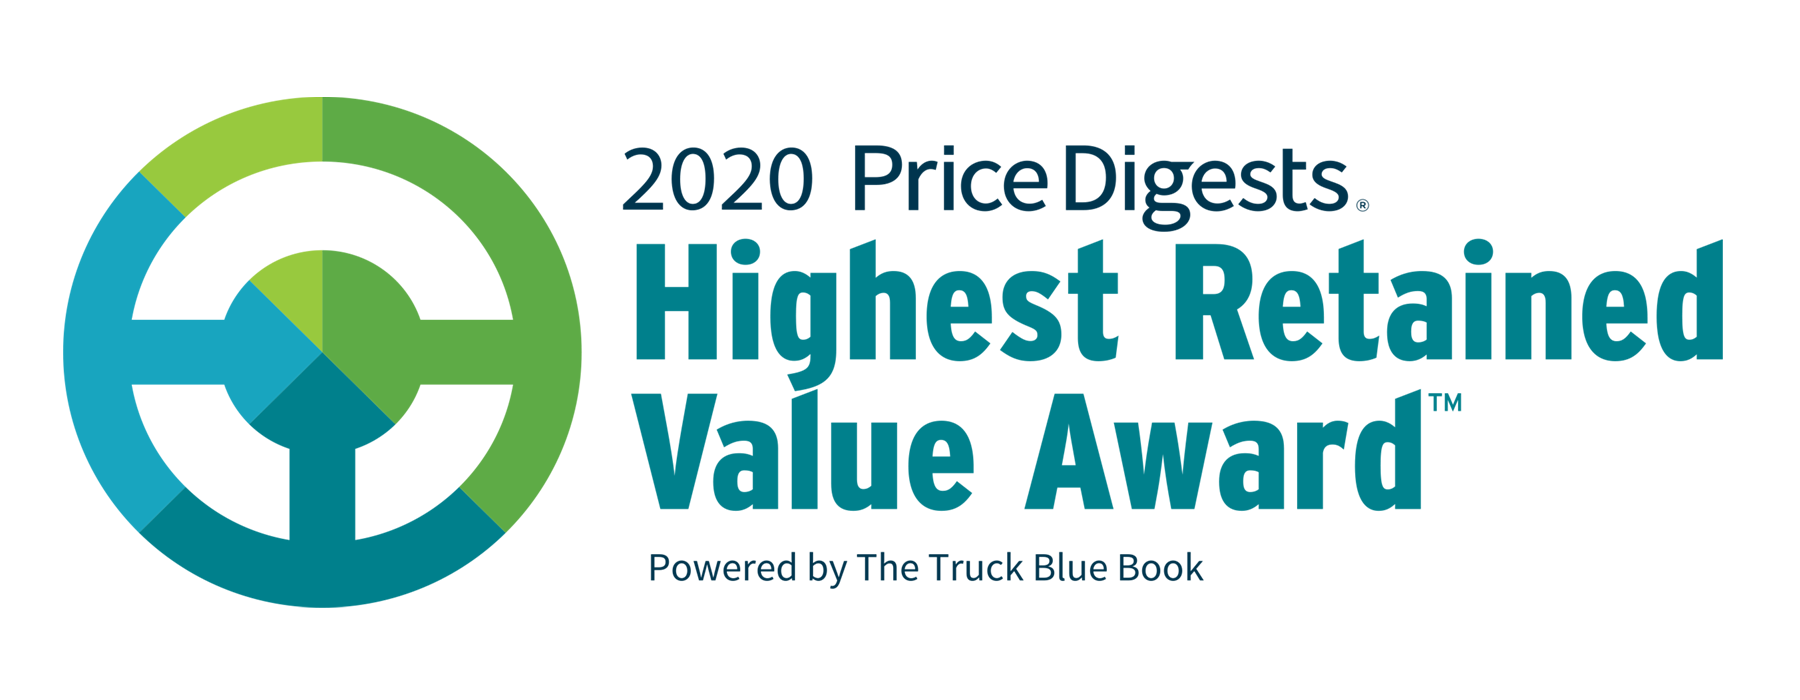 Price Digests Announces 2020 Highest Retained Value